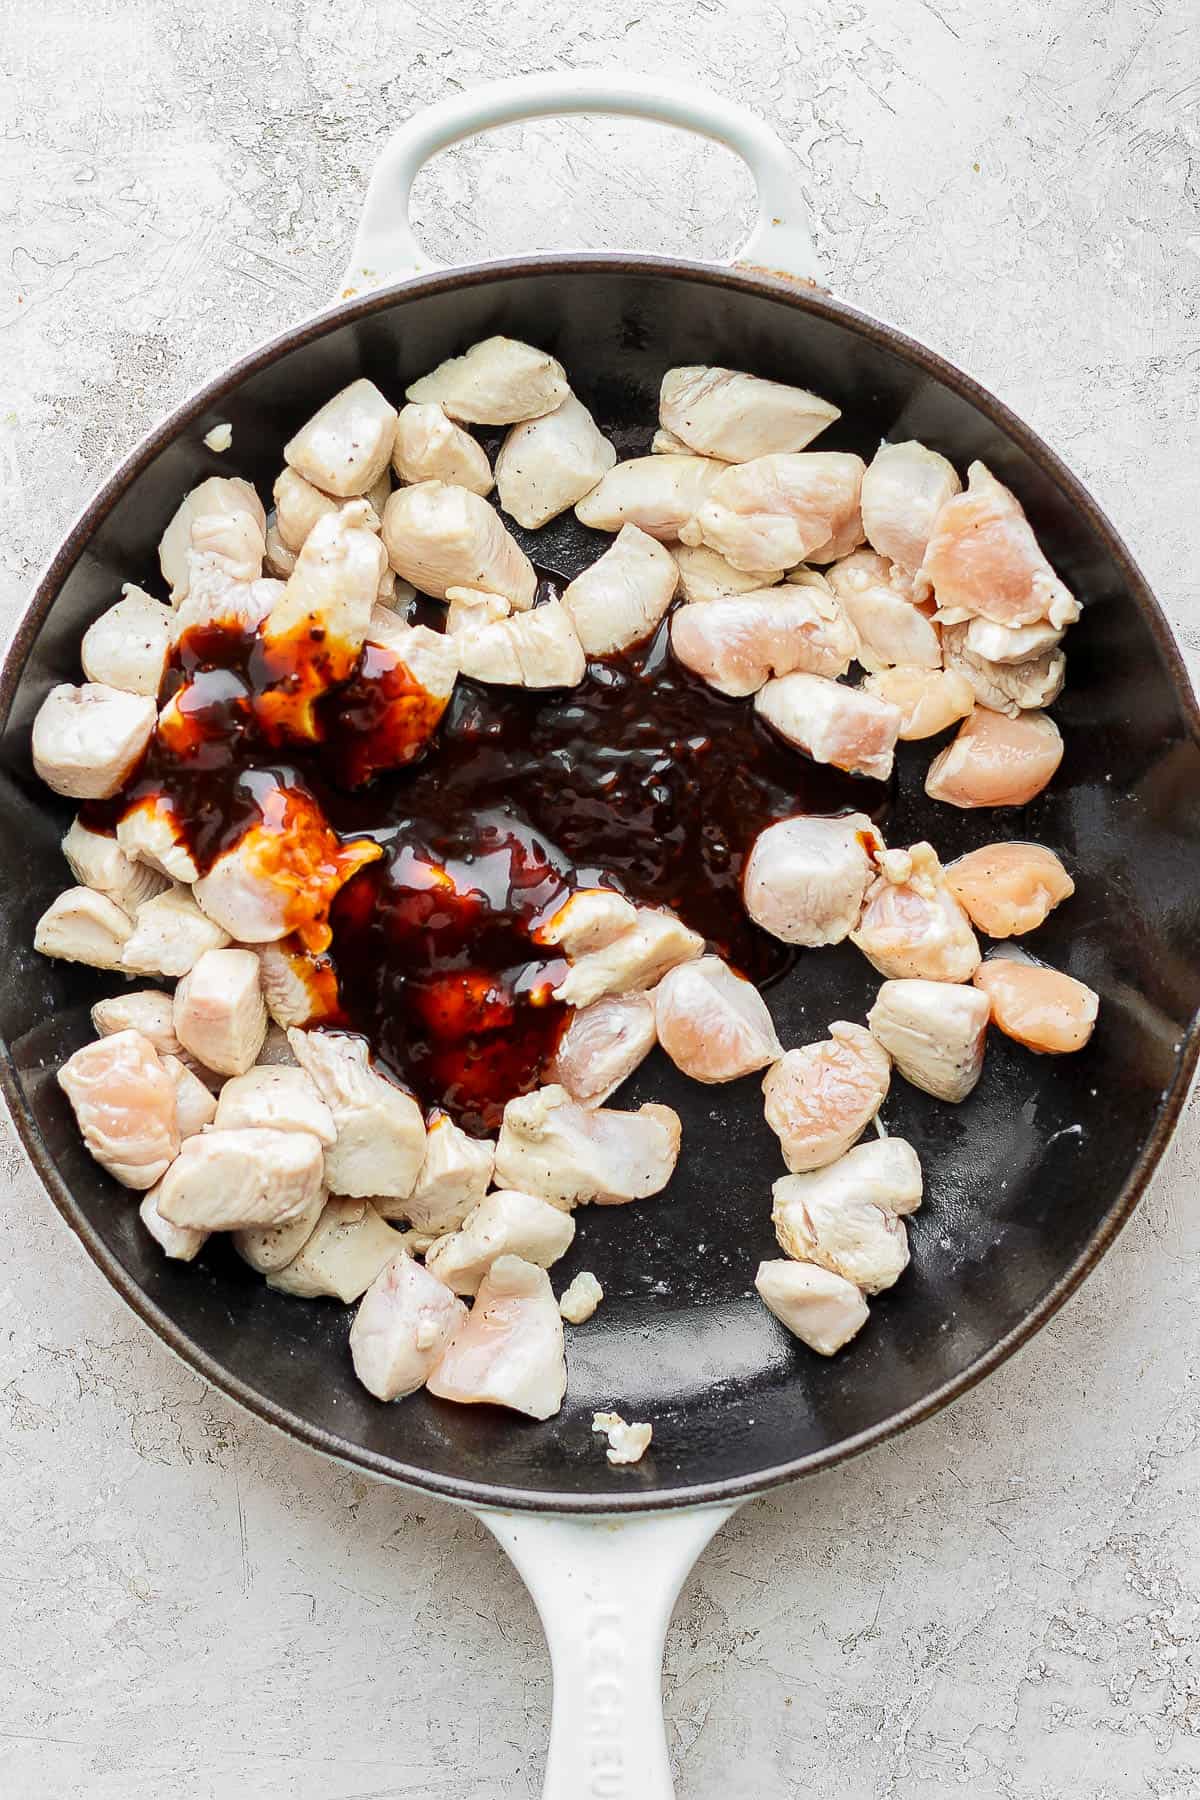 Teriyaki sauce added to the skillet with the chicken.